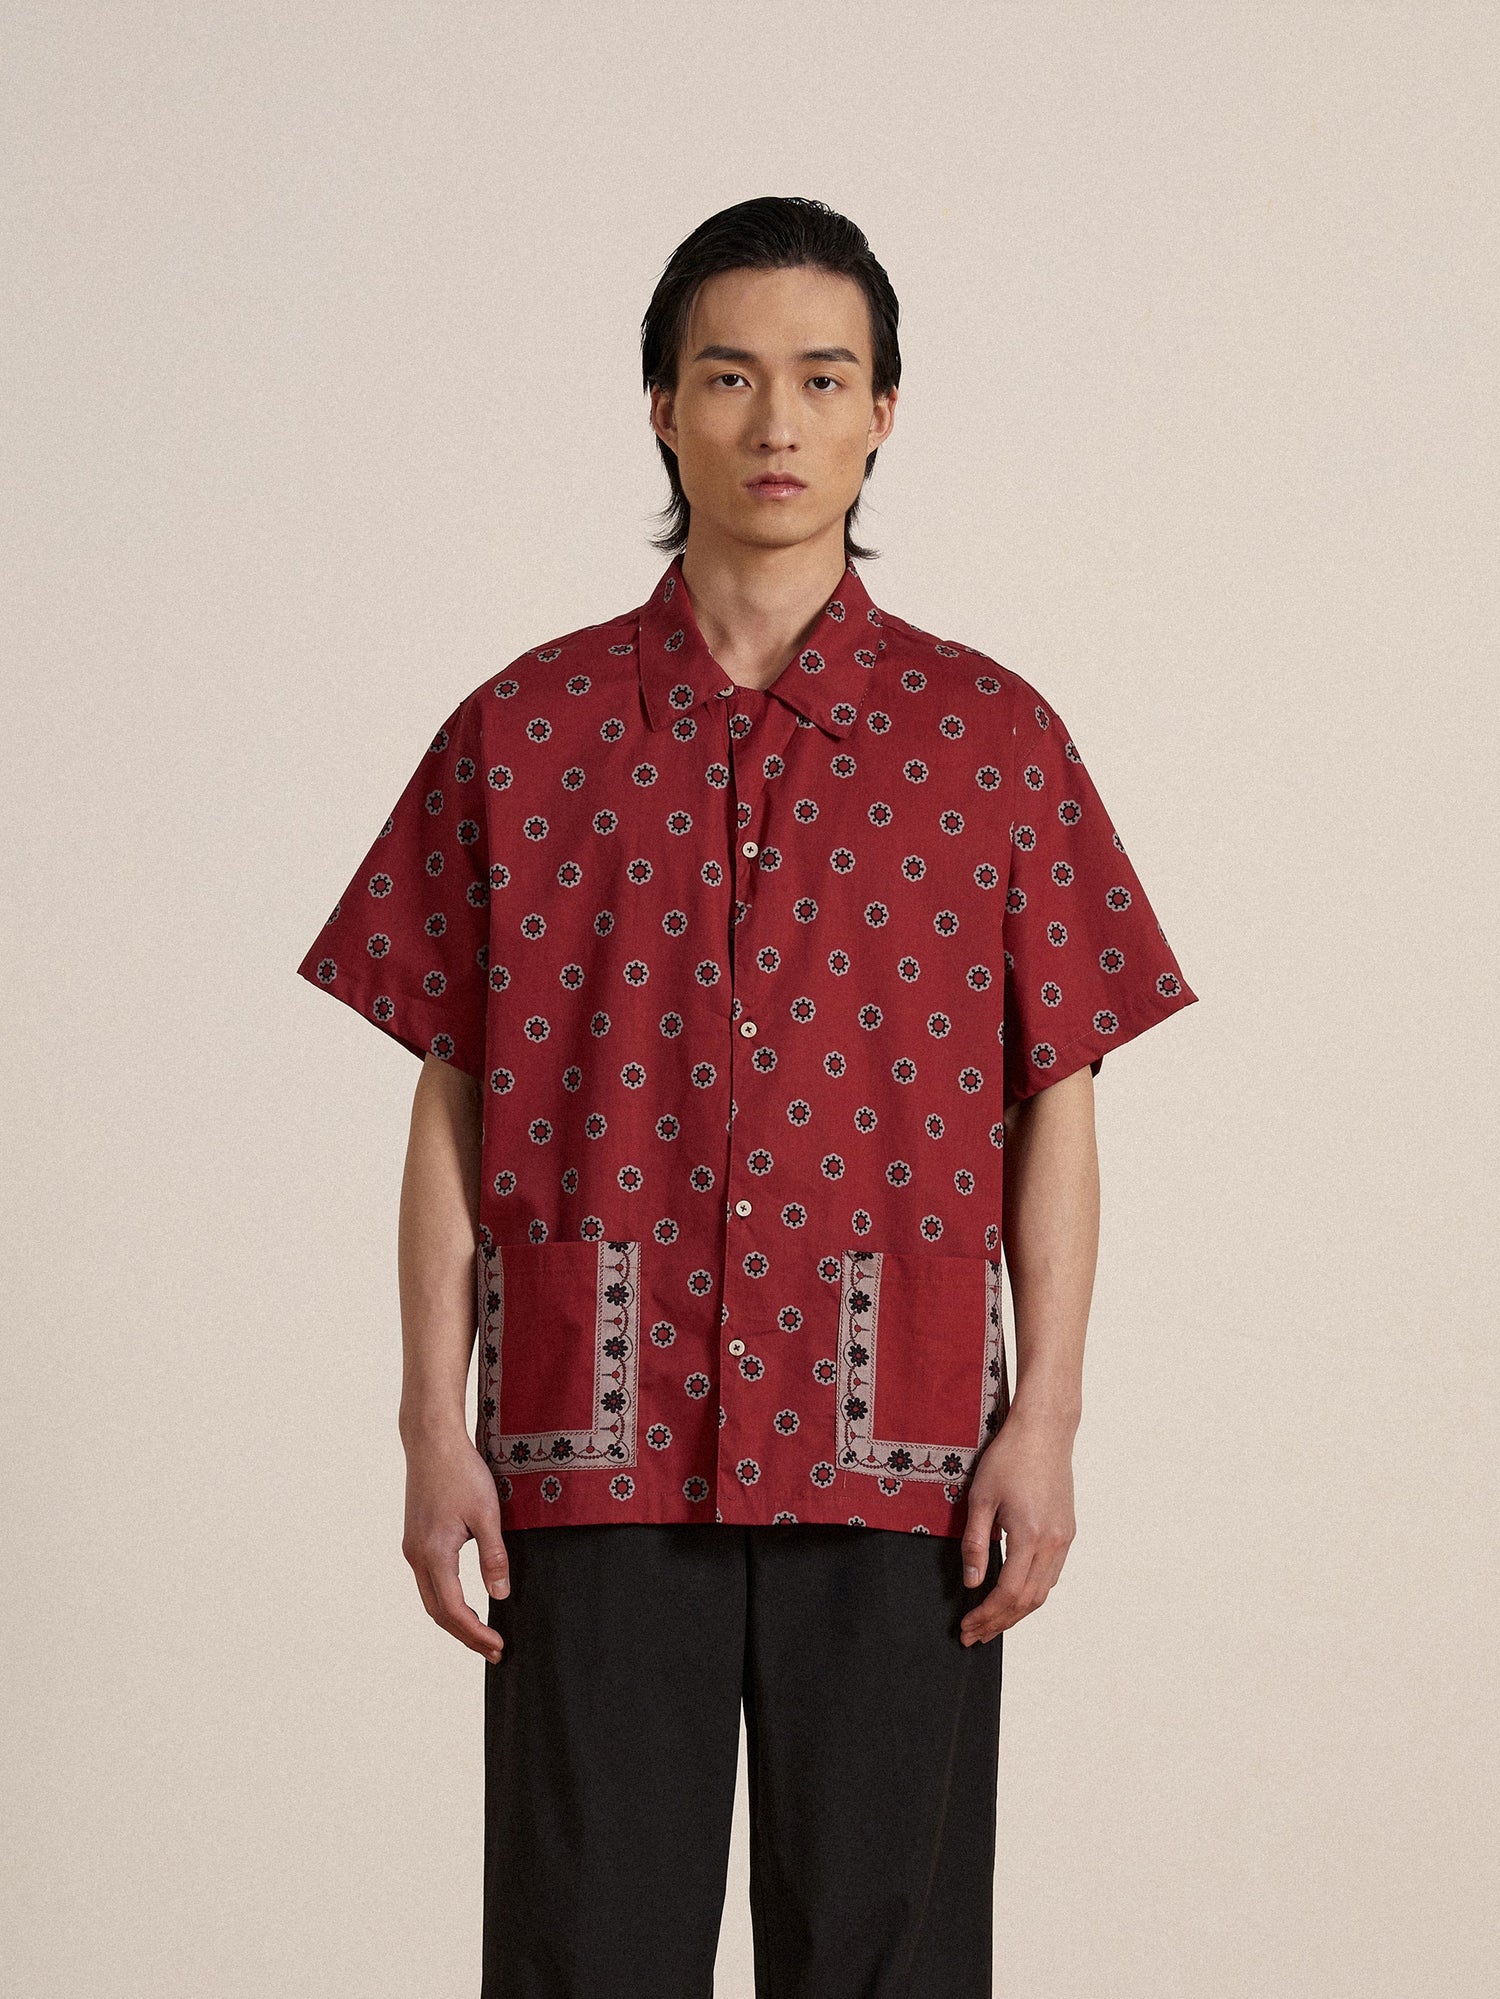 A man wearing a Found Red Motif SS Camp Shirt and black pants.